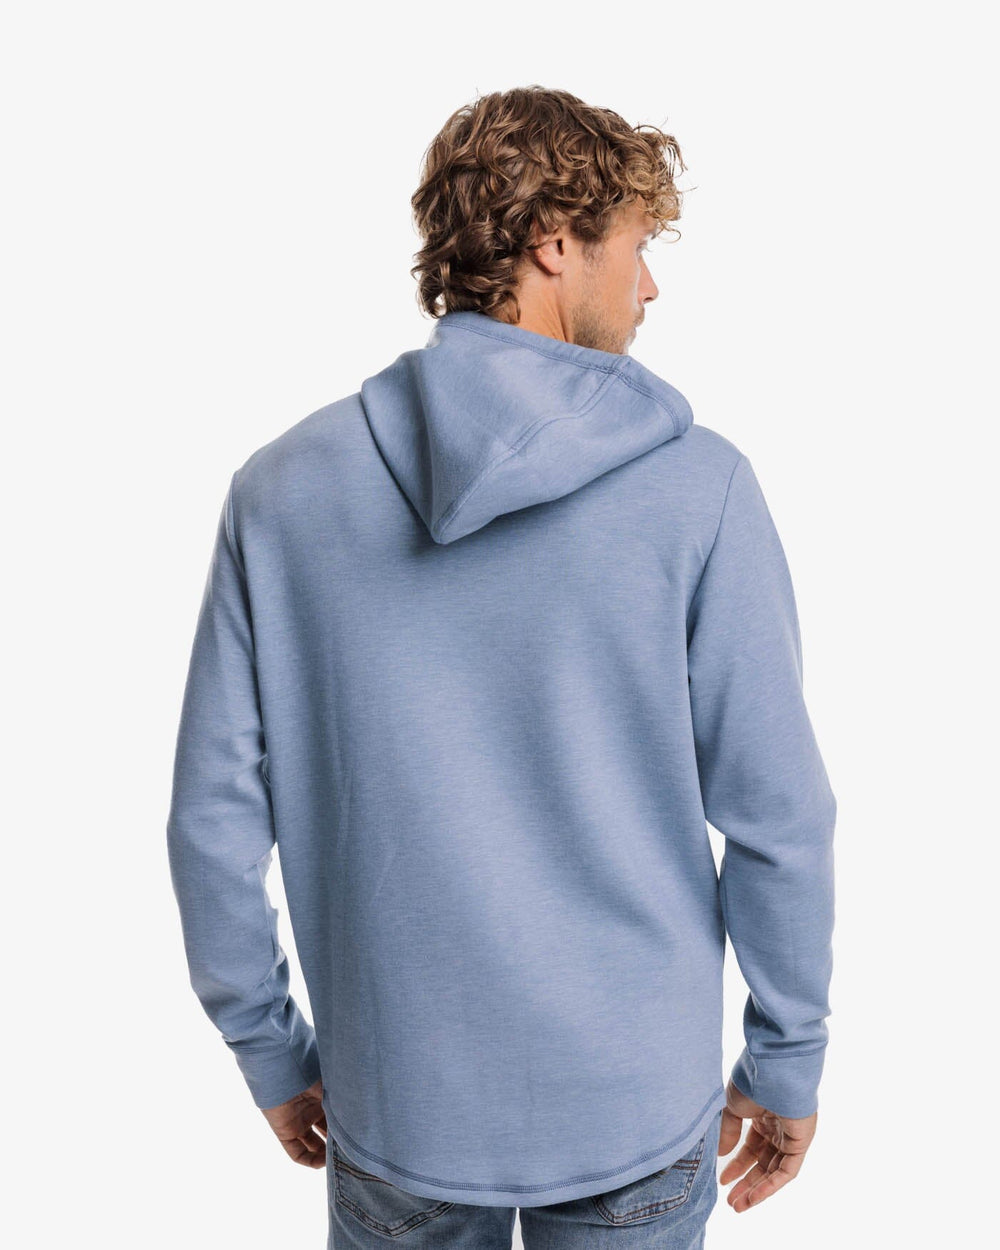 The back view of the Southern Tide Stratford Heather Interlock Hoodie by Southern Tide - Heather Blue Haze